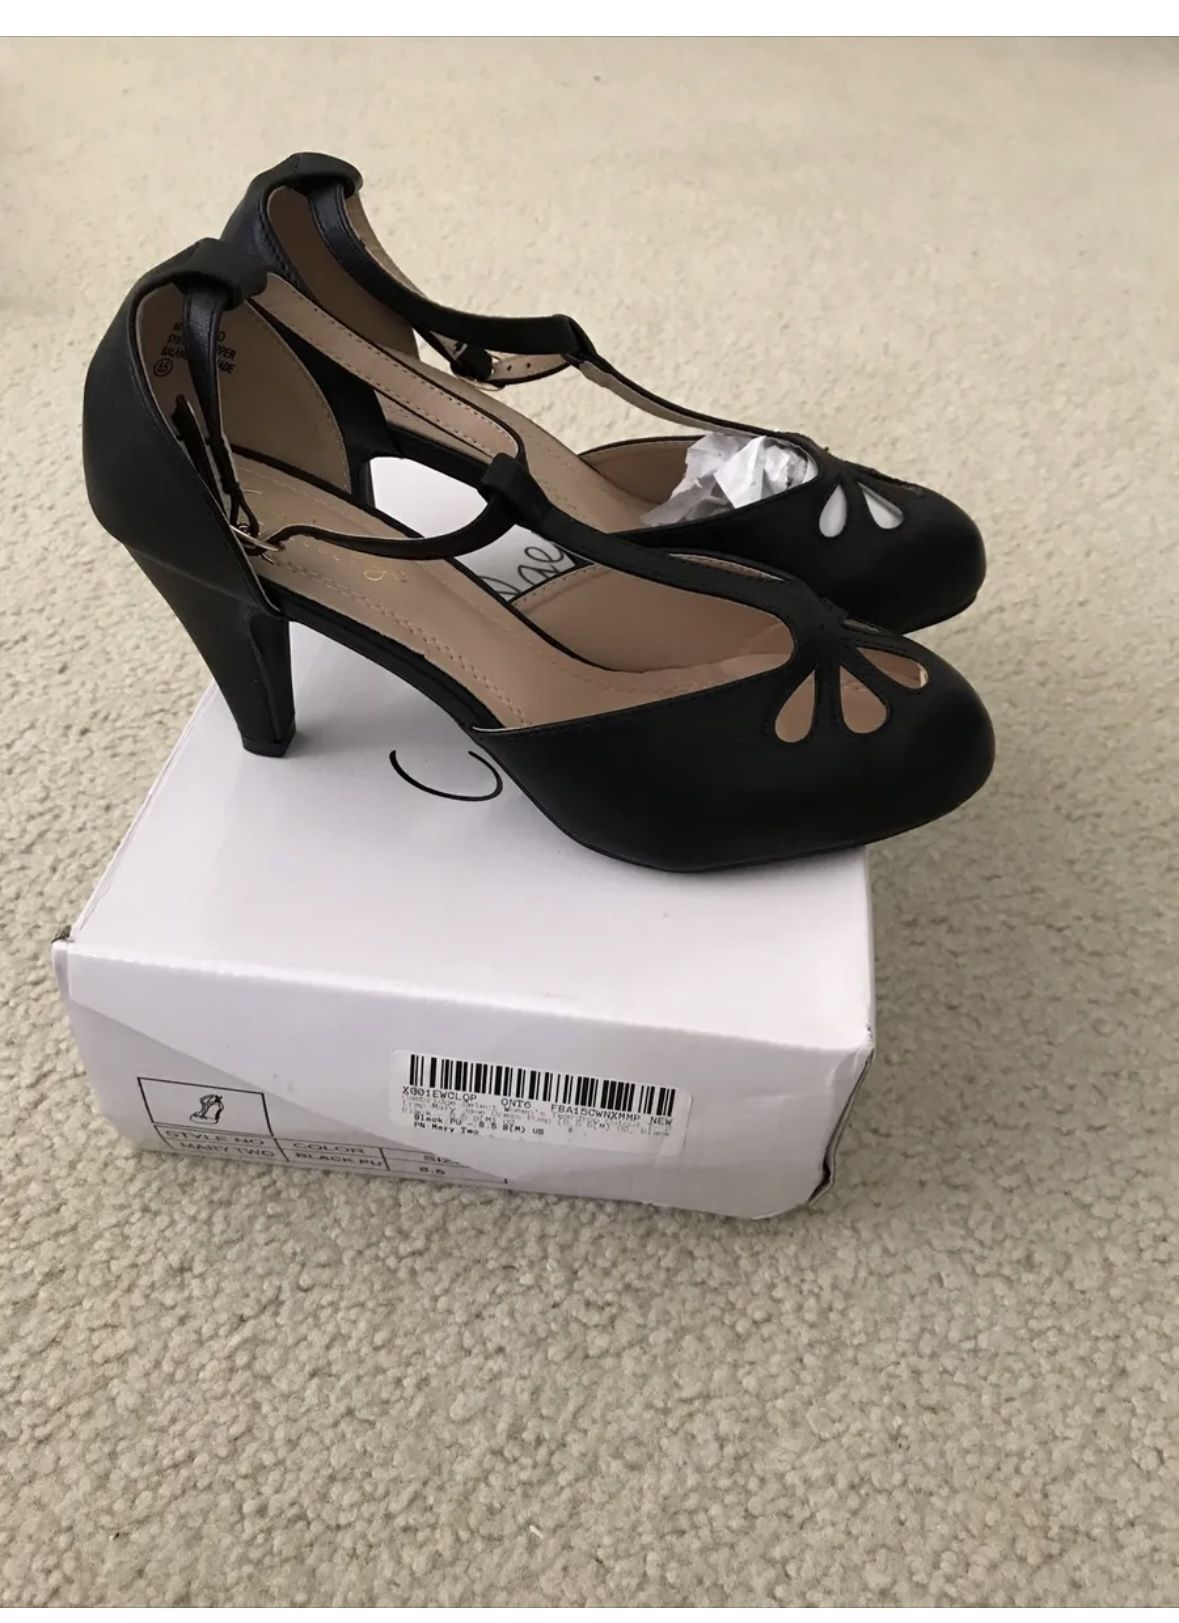 Cambridge Select black "mary two" 3.5" heels - womens 8.5 NEW in box